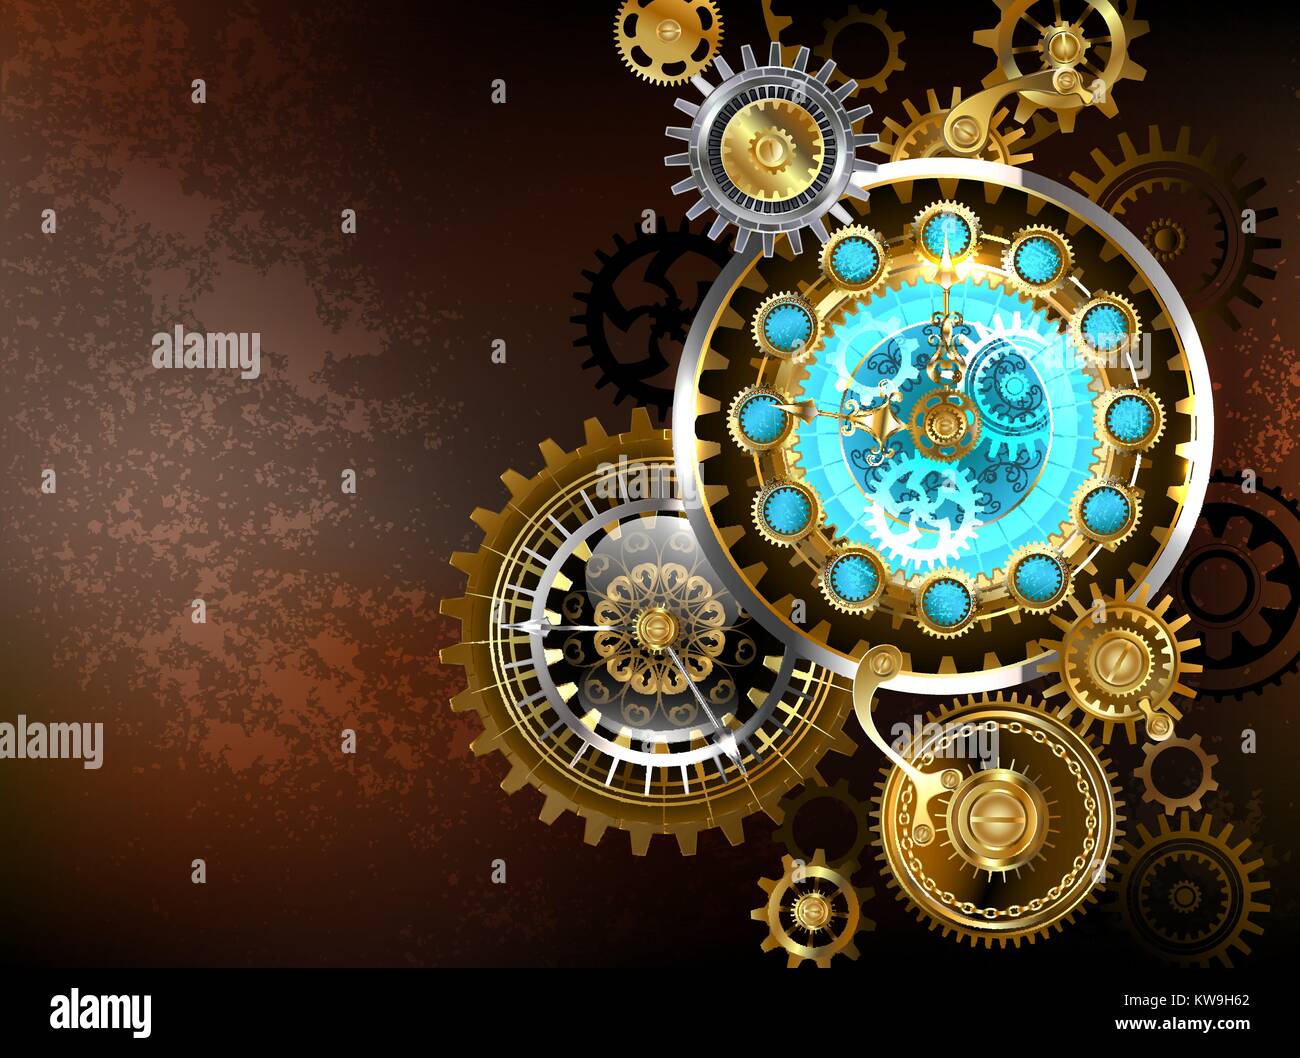 Composition of unusual antique watches and gold and brass gears on a brown, rusty background. Steampunk style. Stock Vector